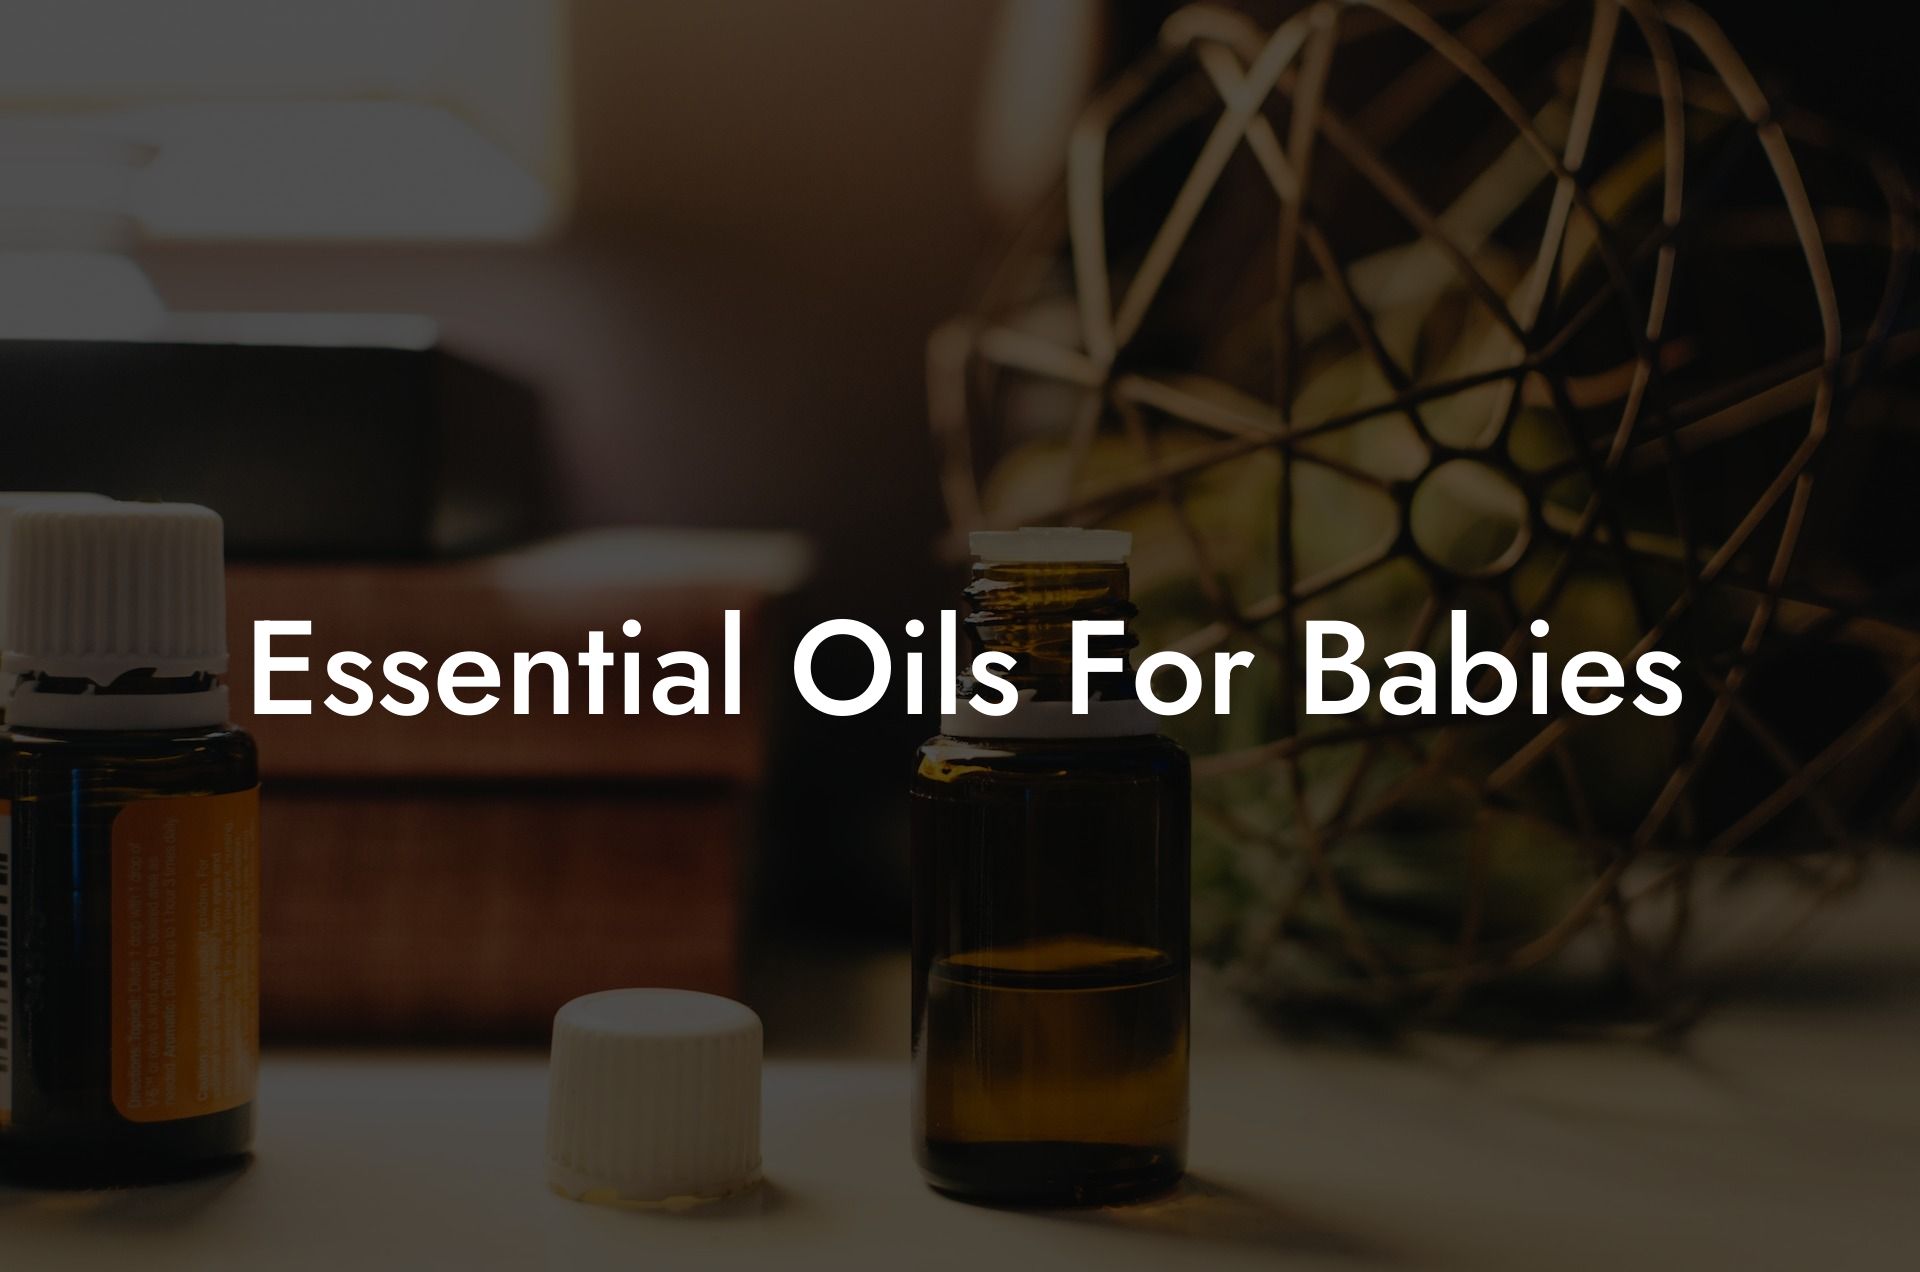 Essential Oils For Babies